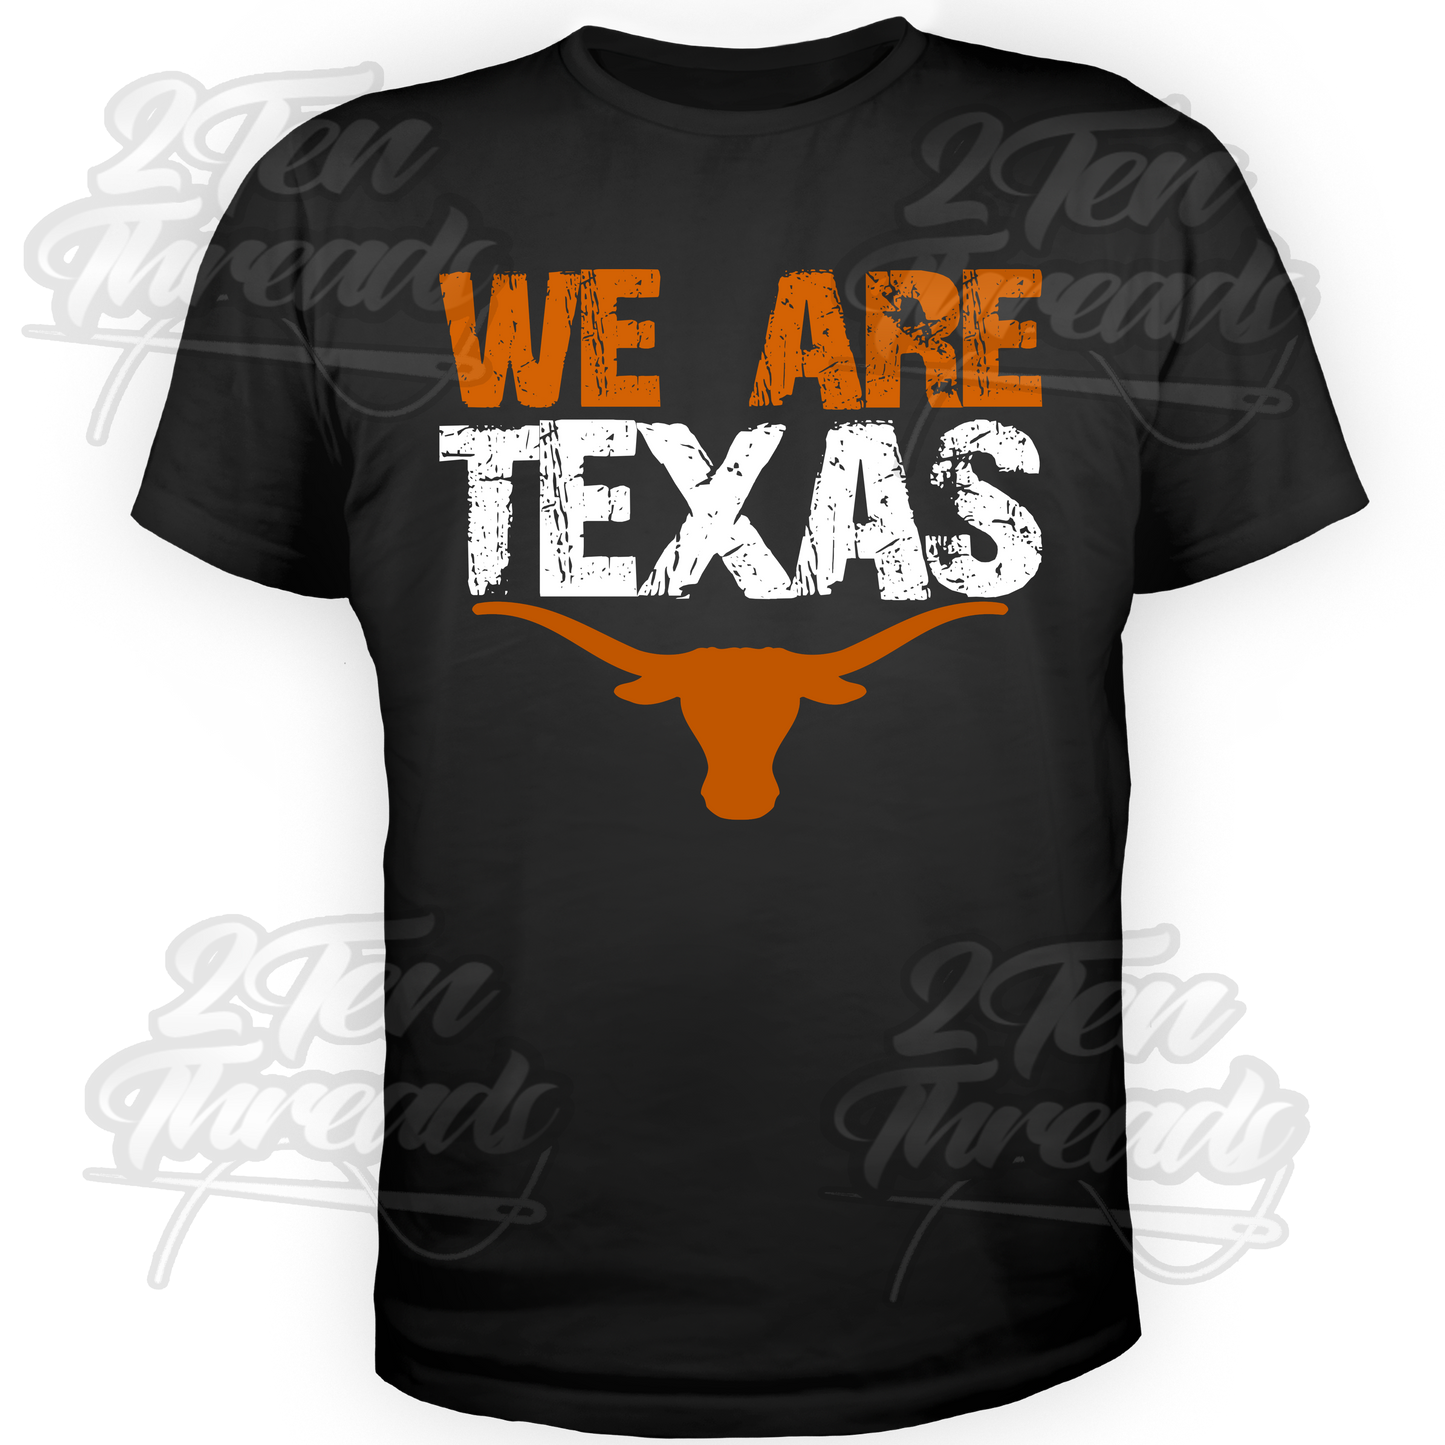 We are Texas Shirt